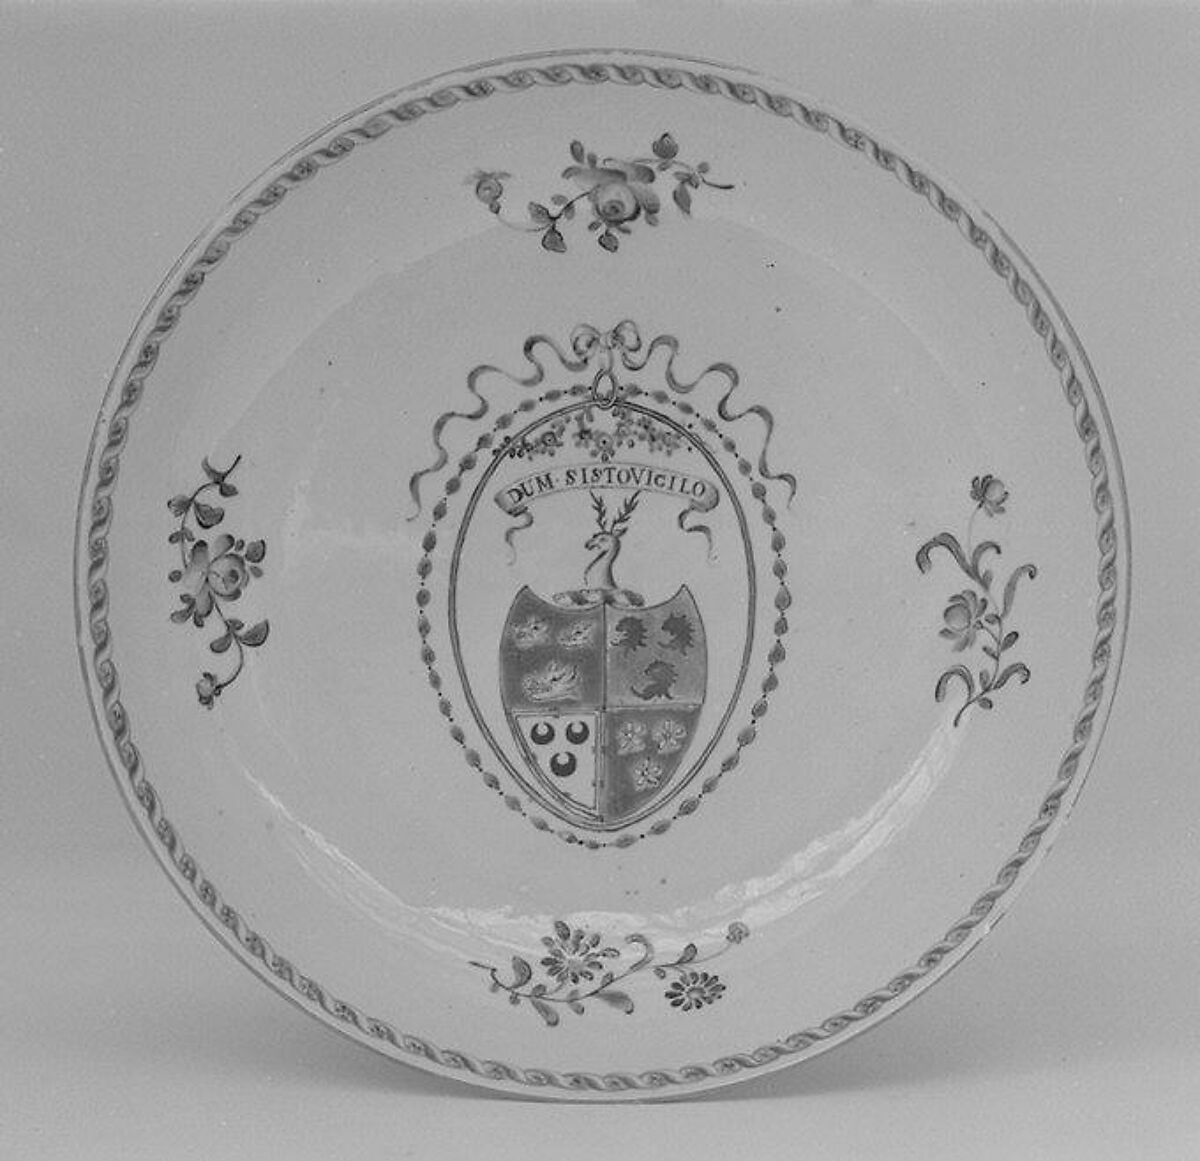 Soup plate (part of a service), Hard-paste porcelain, Chinese, for British market 